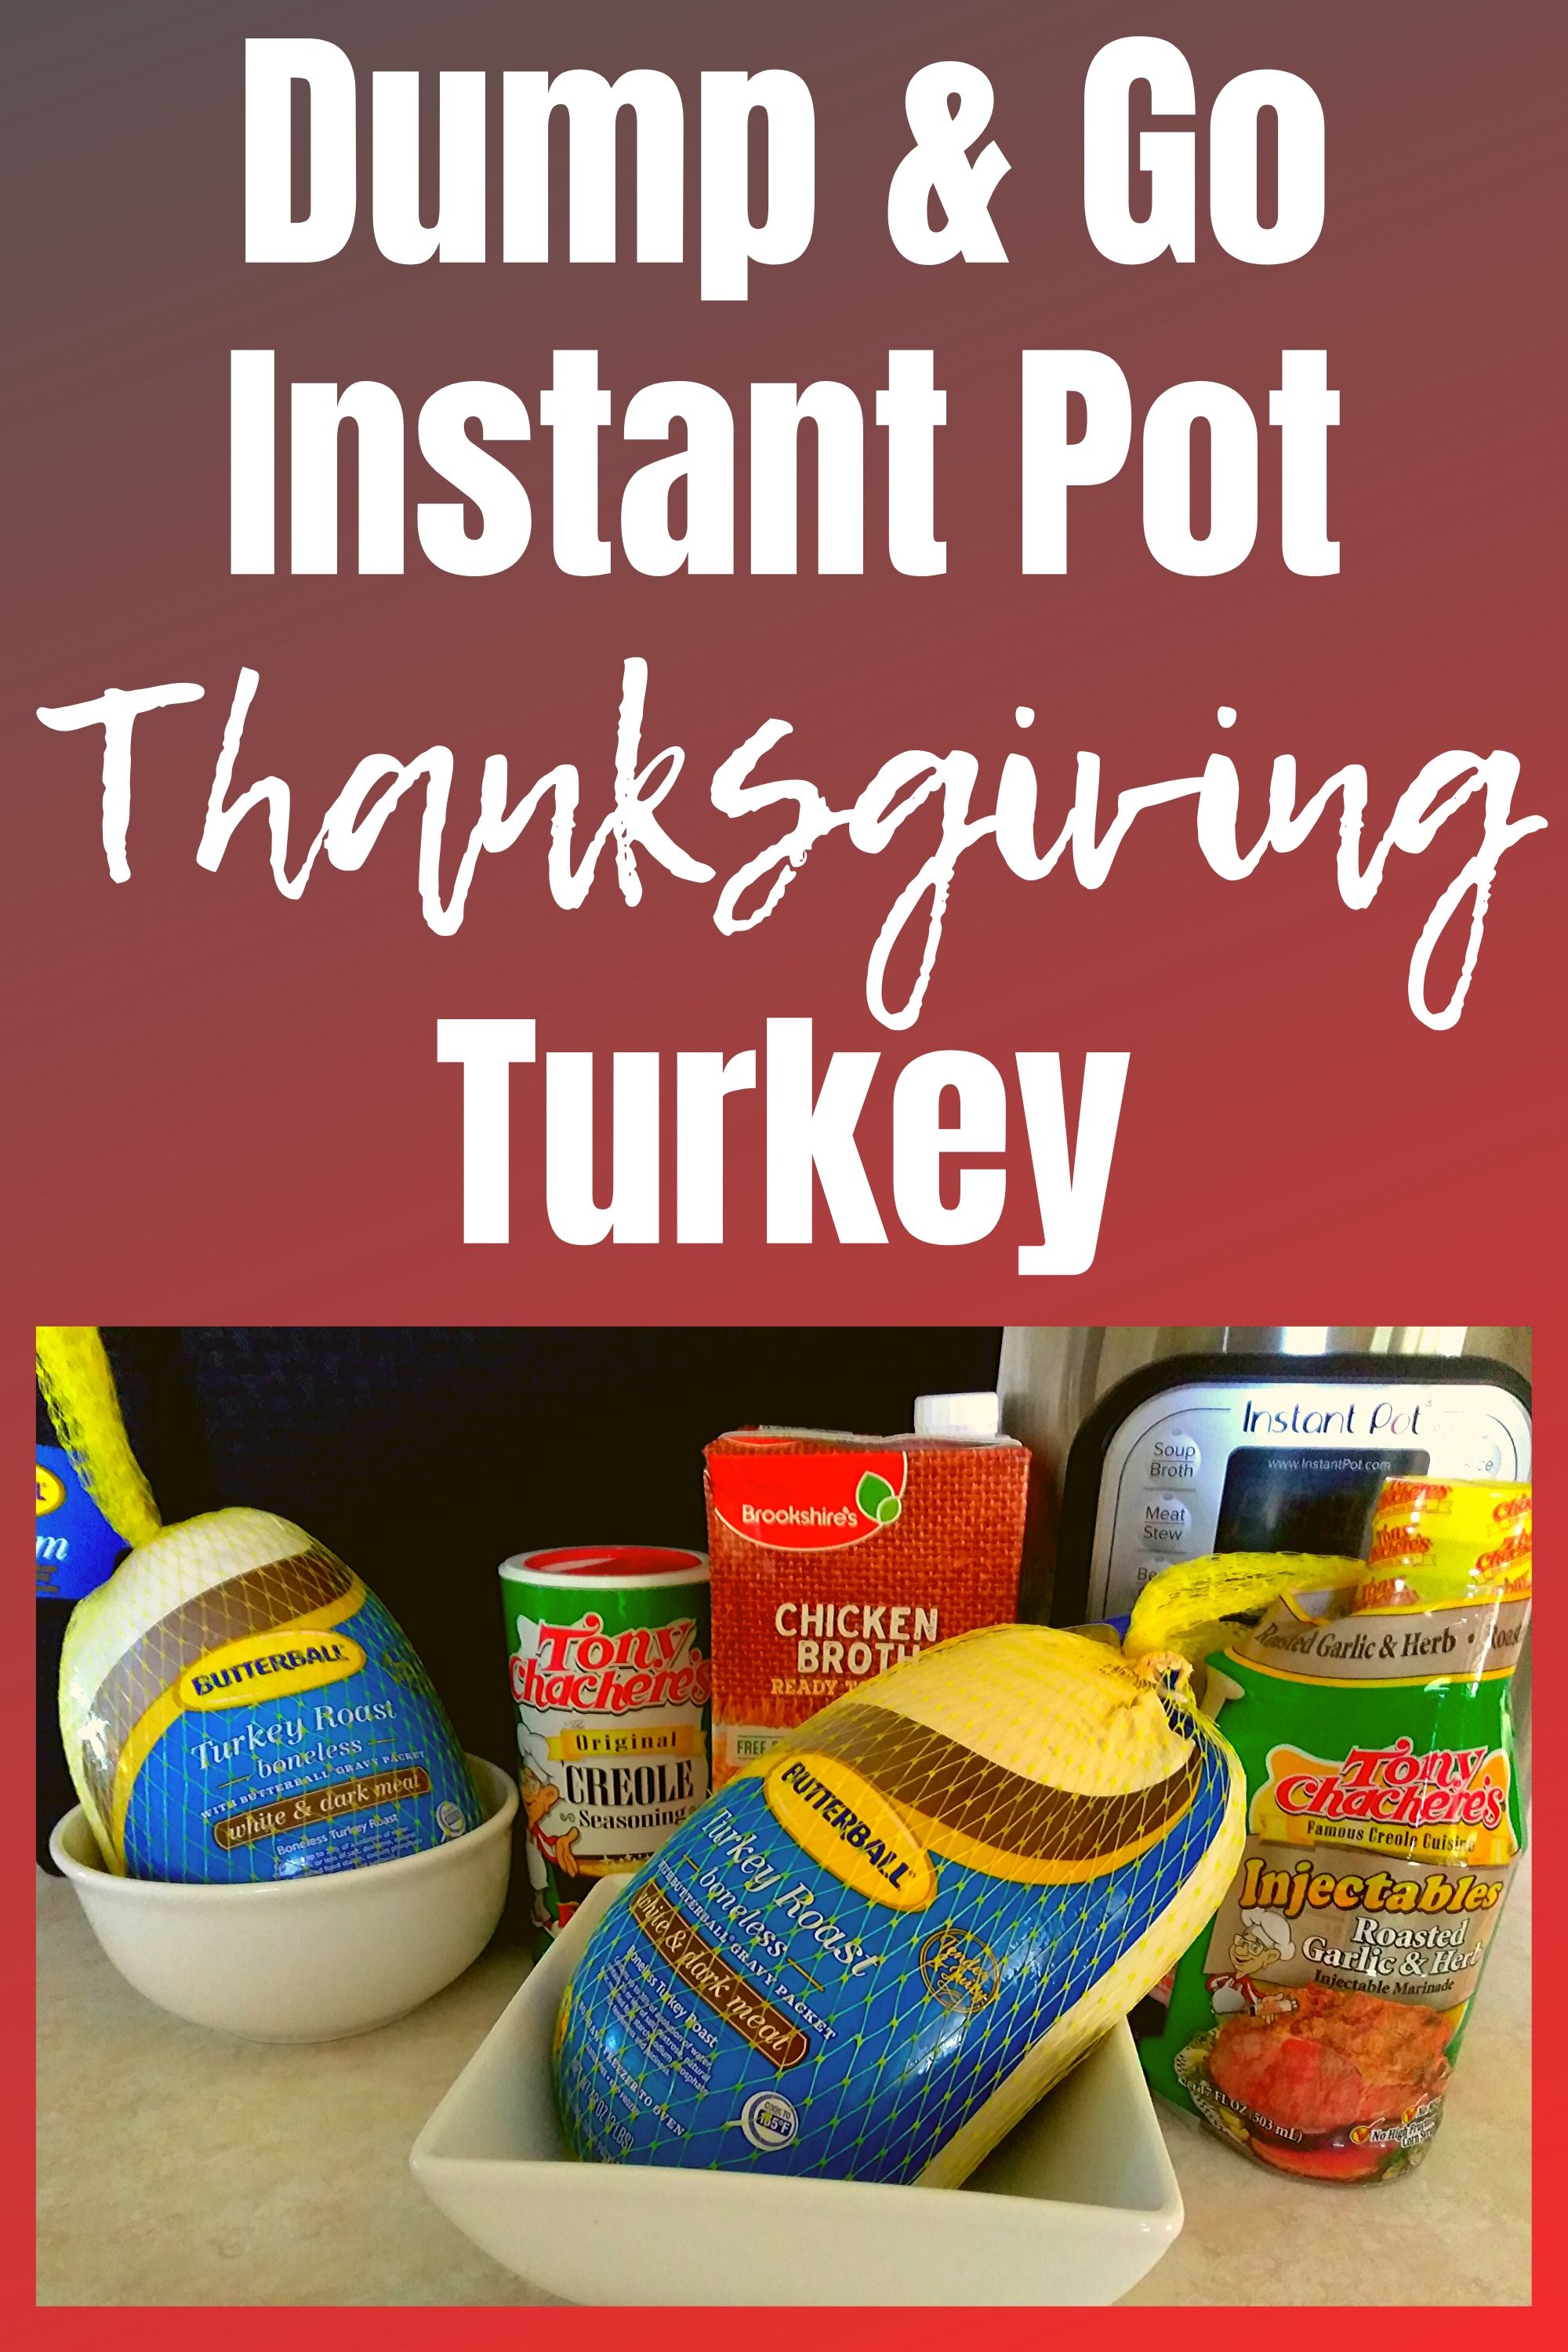 Two butterball turkey roast in packaging, Tony Chachere's Seasoning, Tony Chachere's Injectable Marinade all sitting in front of an Instant Pot